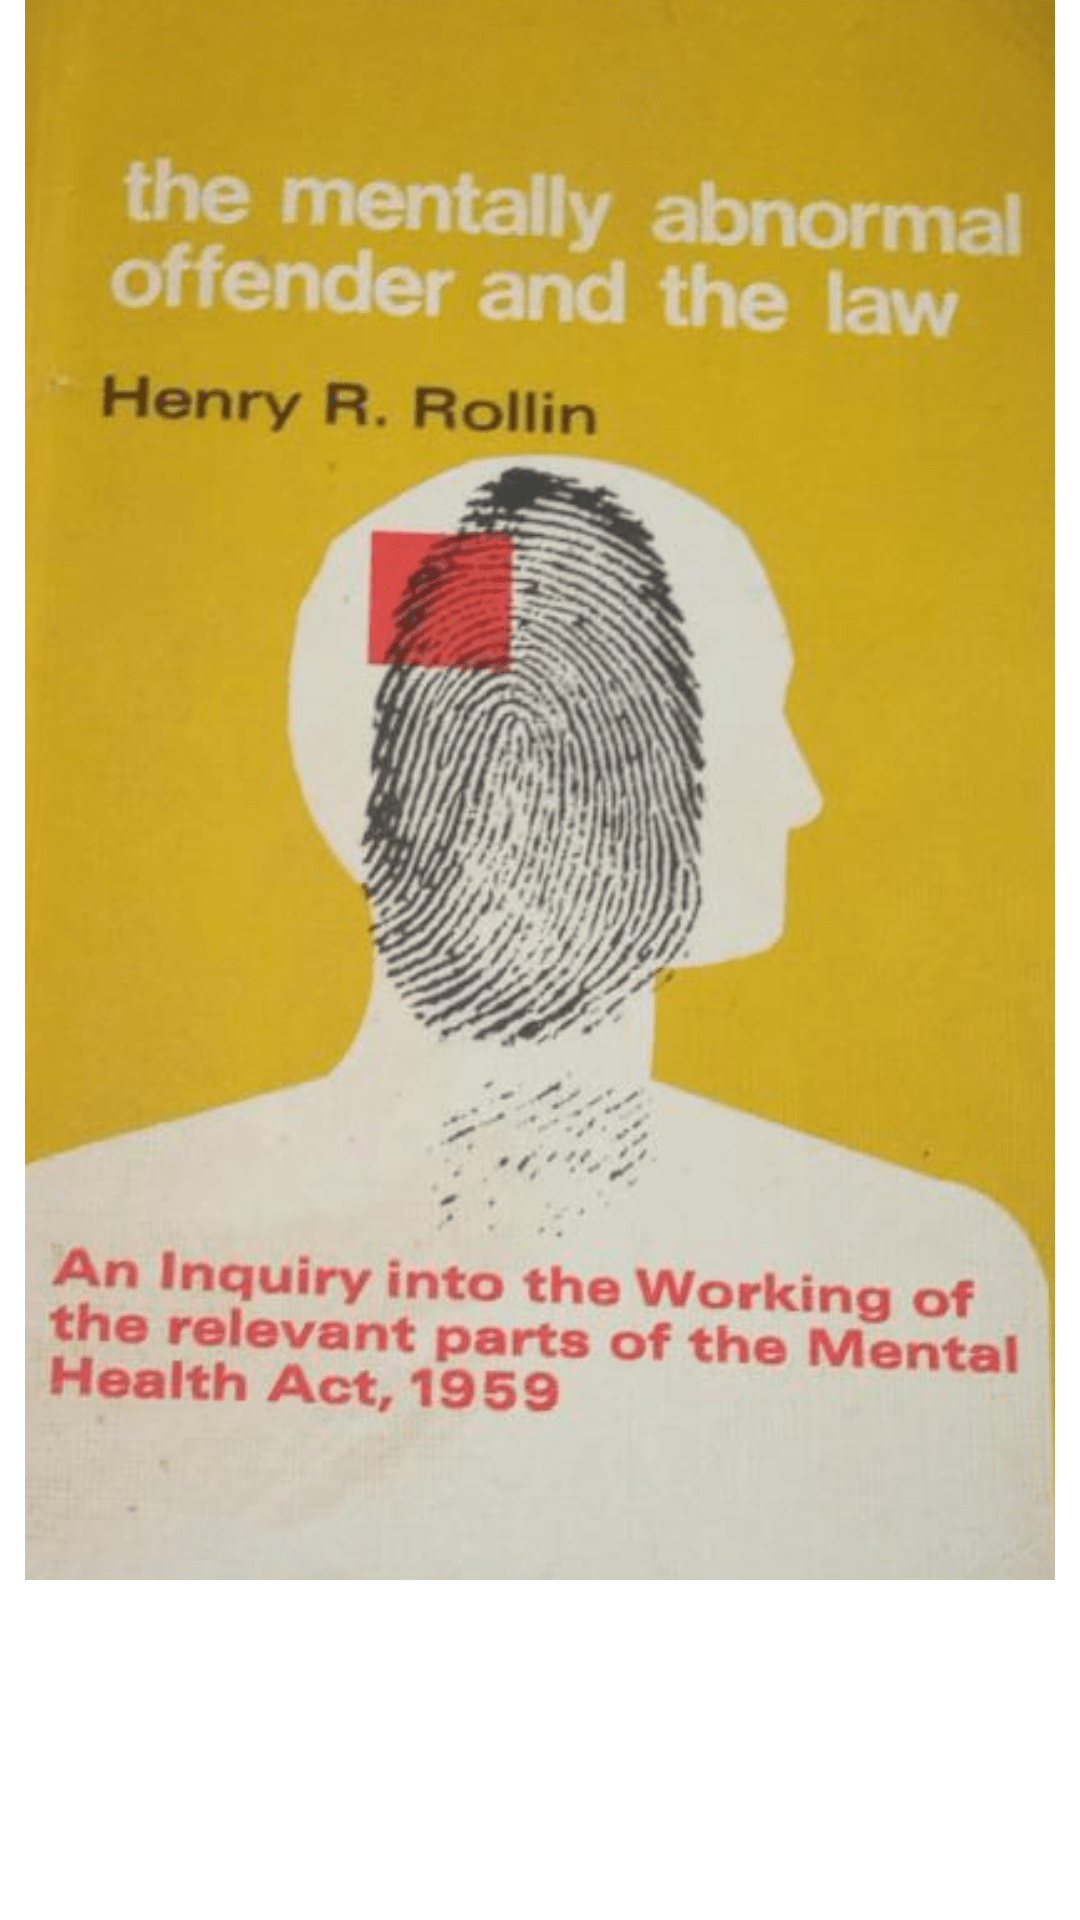 The Mentally Abnormal Offender and the Law: An Inquiry Into the Working of the Relevant Parts of the Mental Health Act, 1959